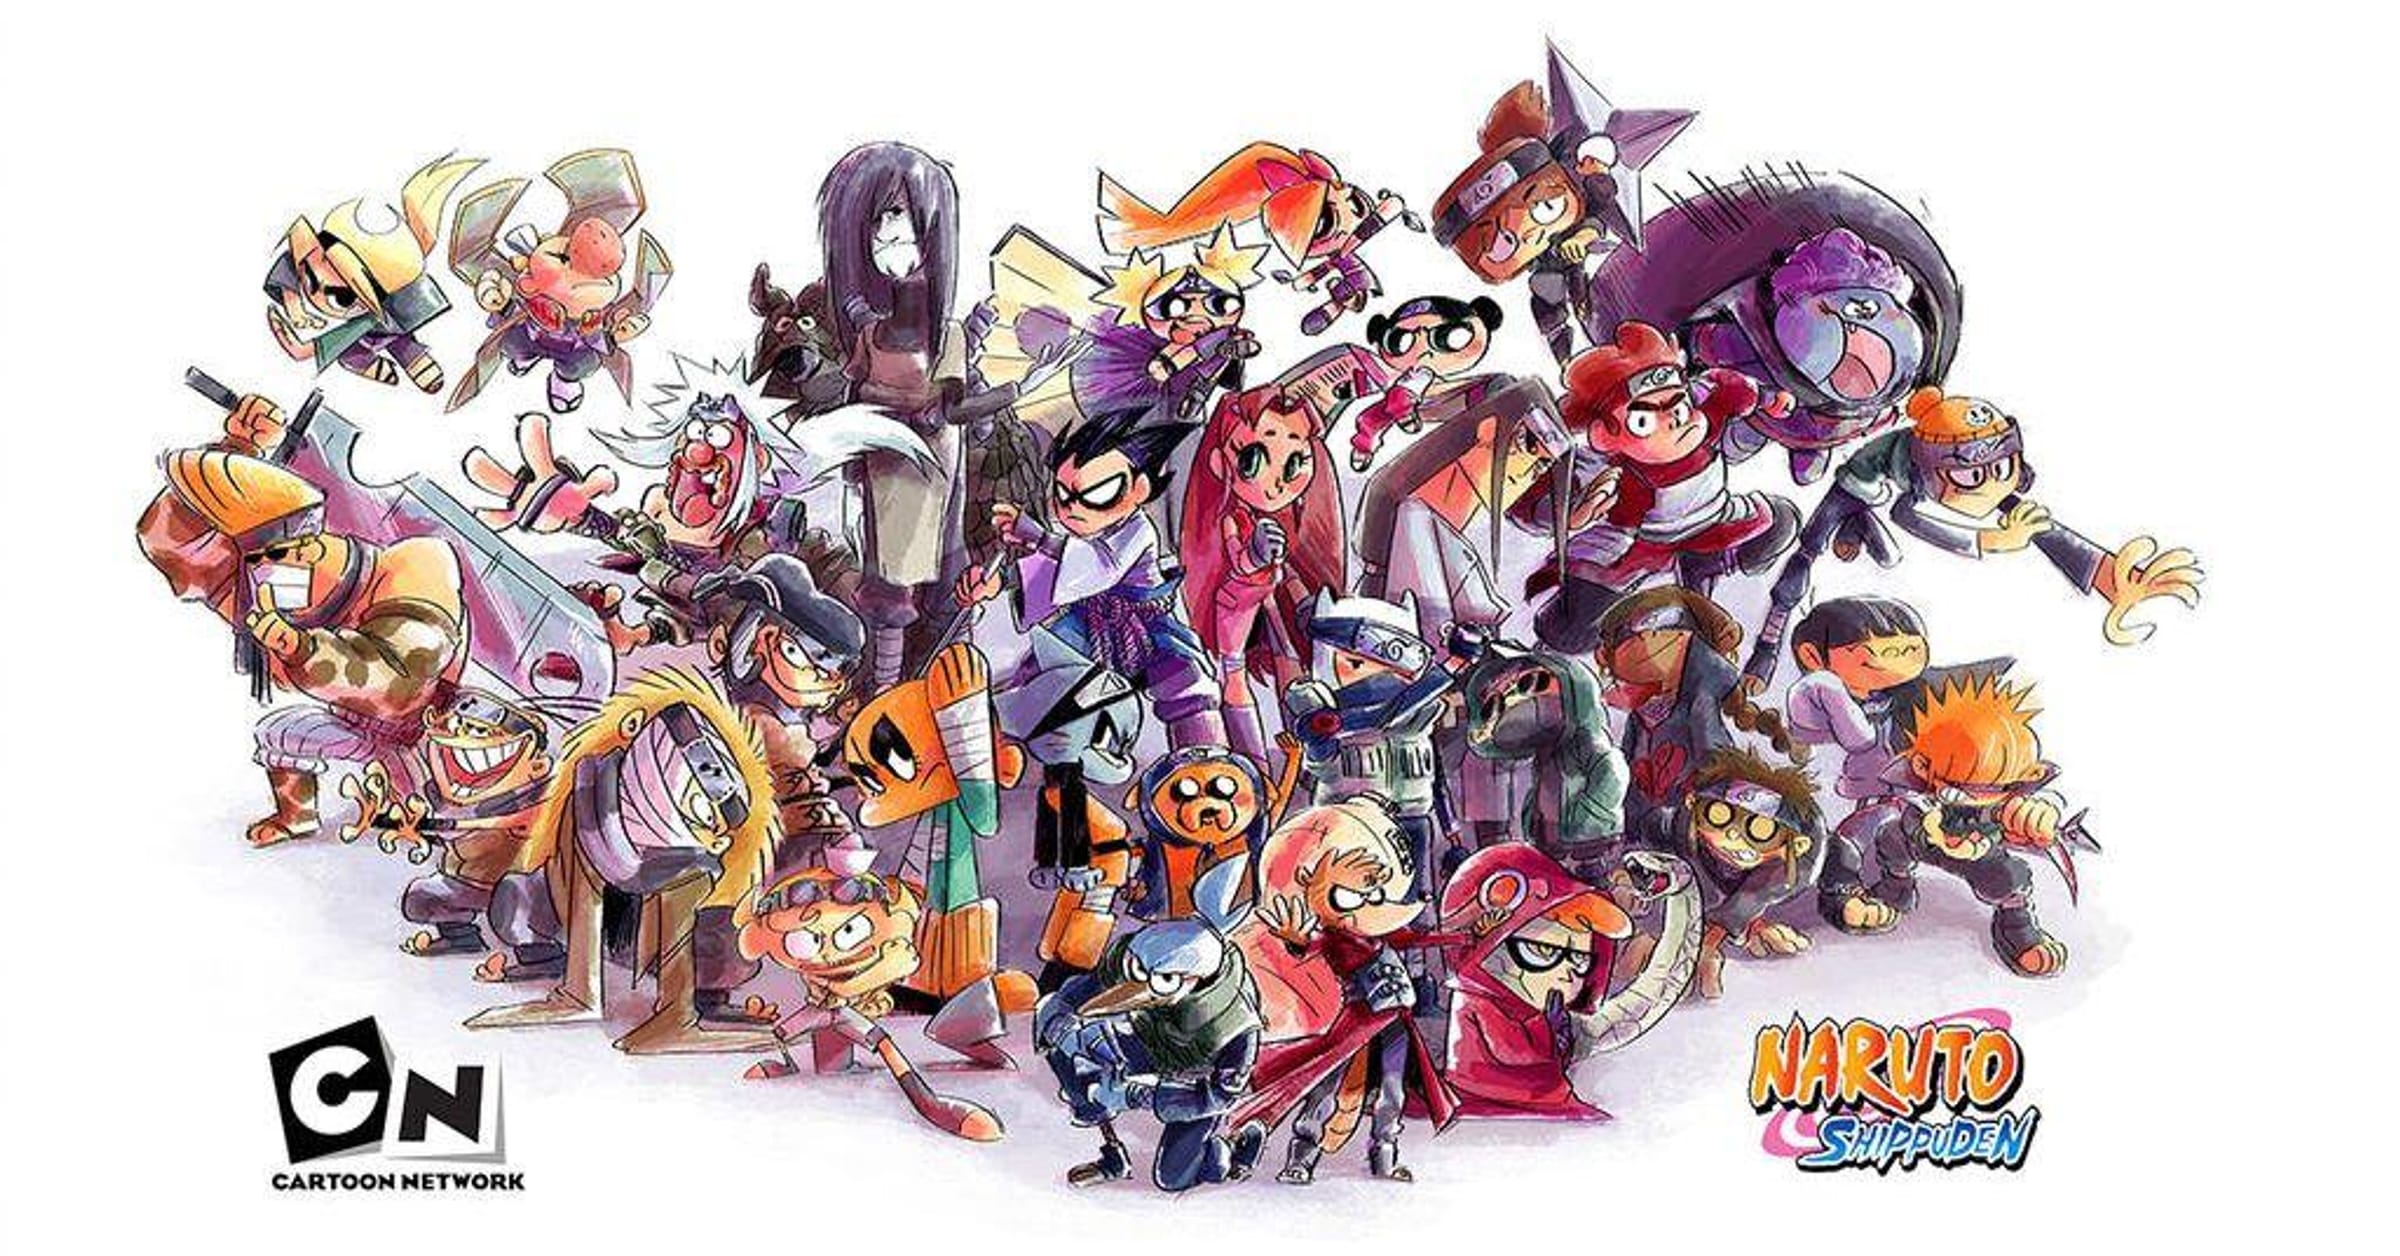 Amazing Drawings of Cartoon Network Characters Drawn Anime Style